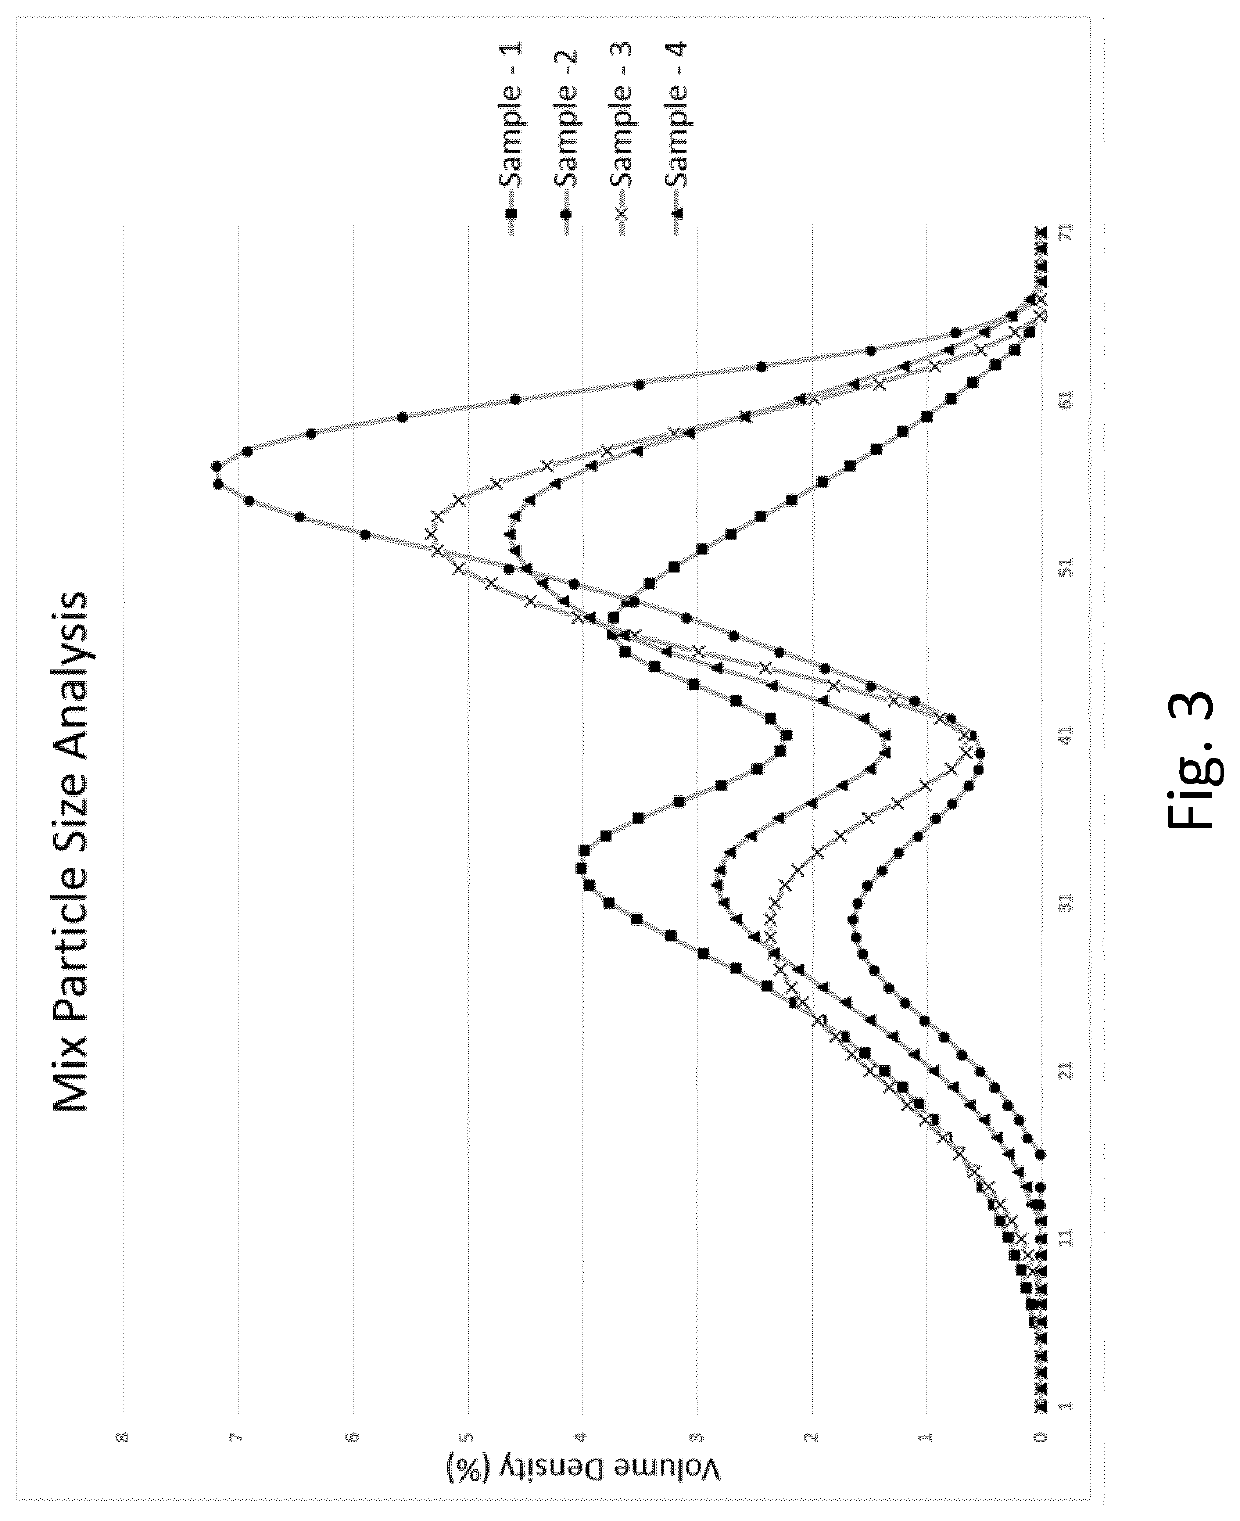 A method of producing frozen confection with protein agglomeration and delayed sucrose addition